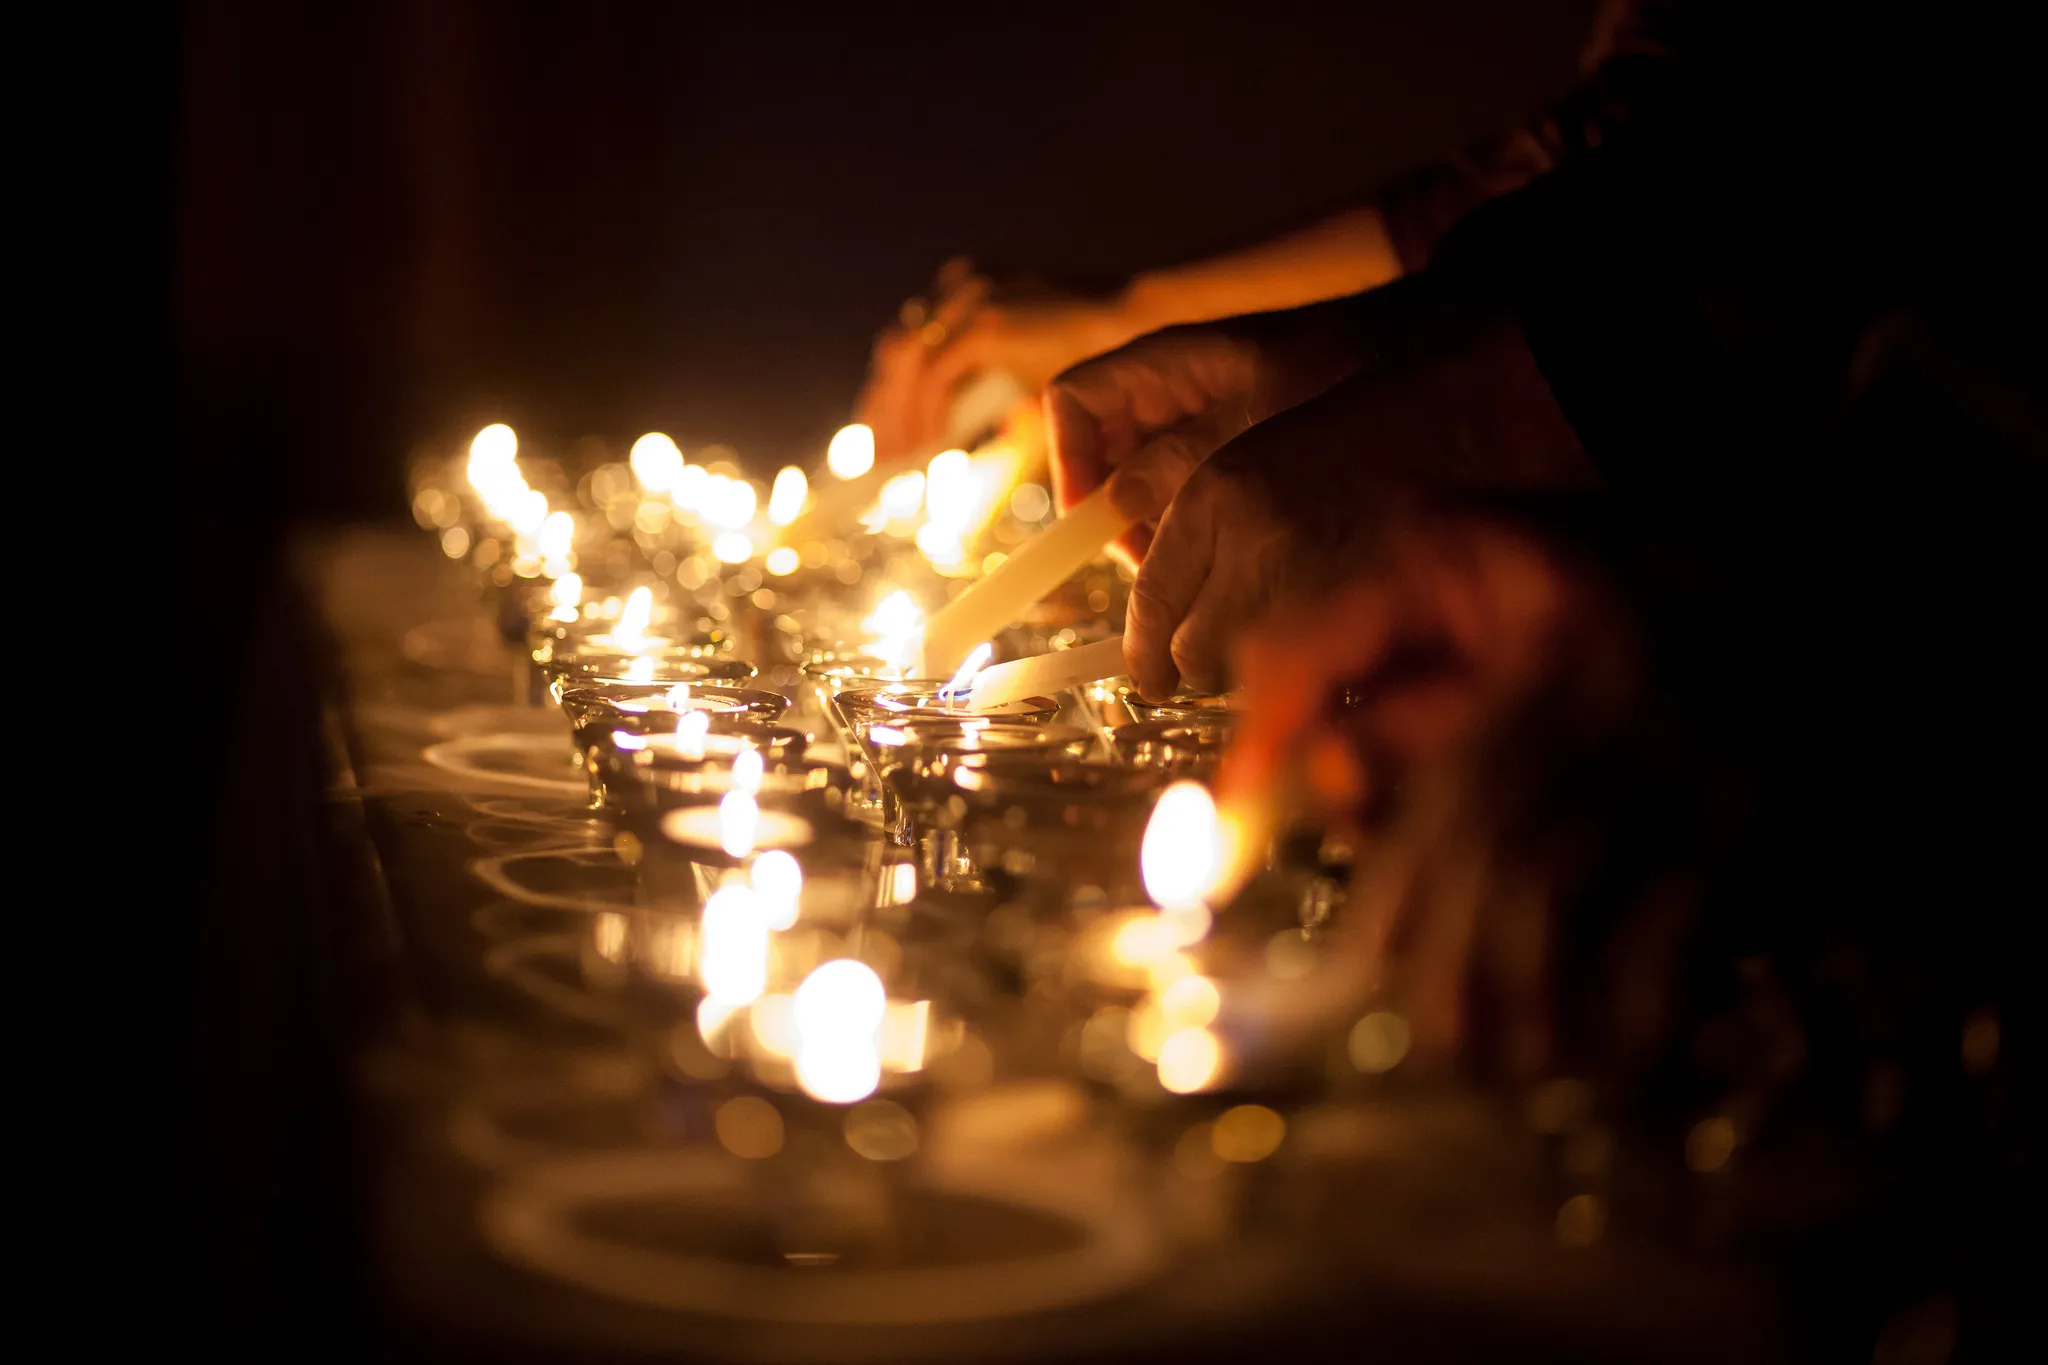 People lighting candles.